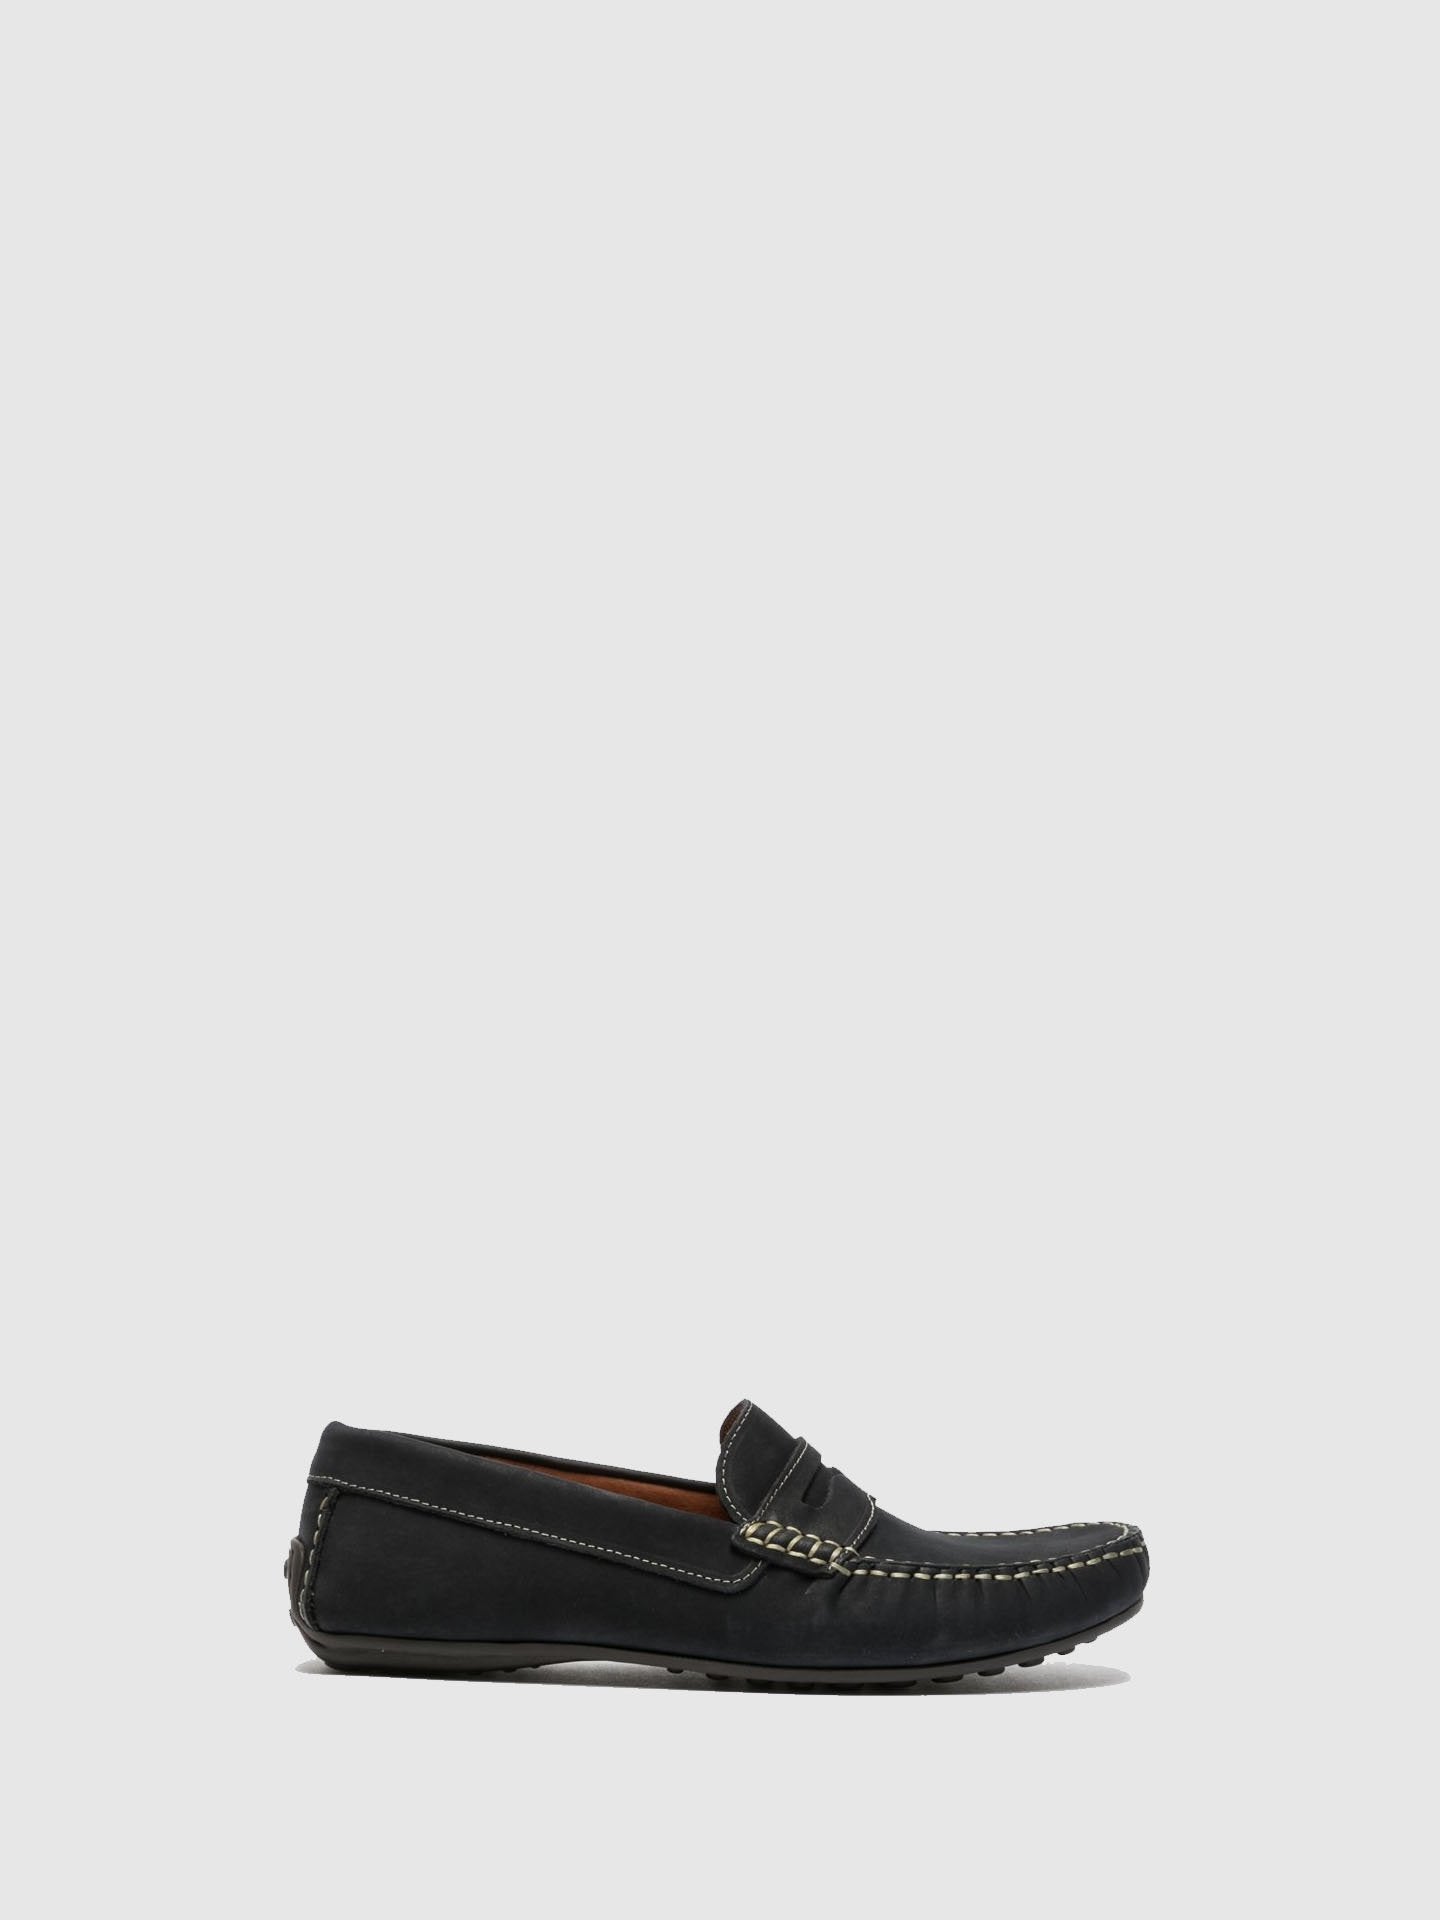 Foreva Blue Loafers Shoes